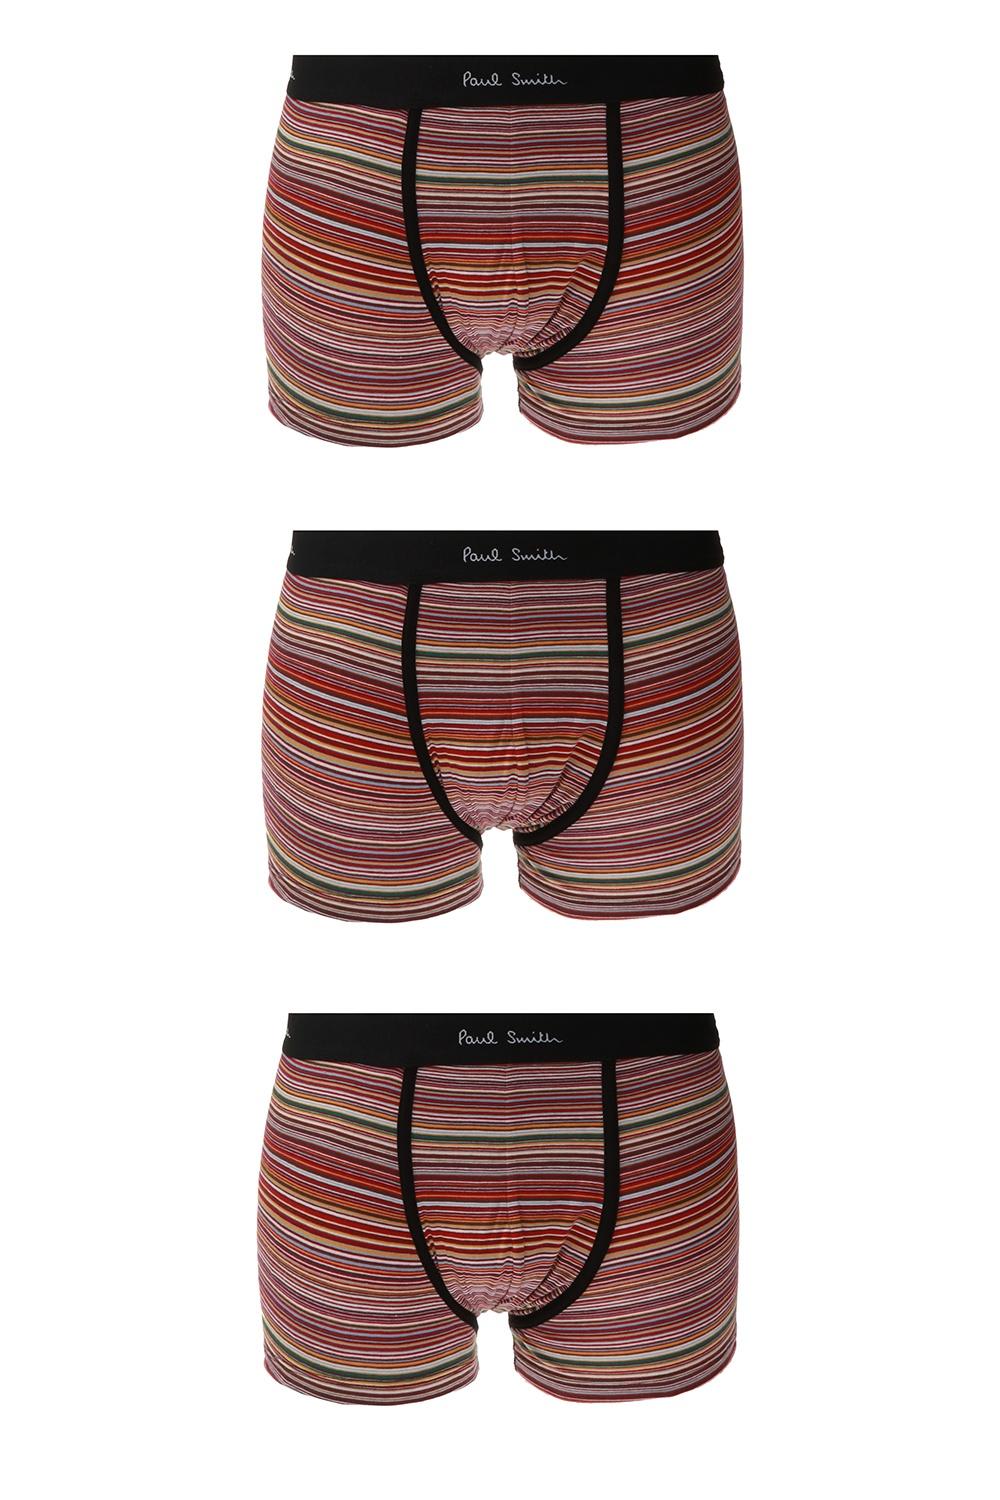 PAUL SMITH BOXERS THREE-PACK